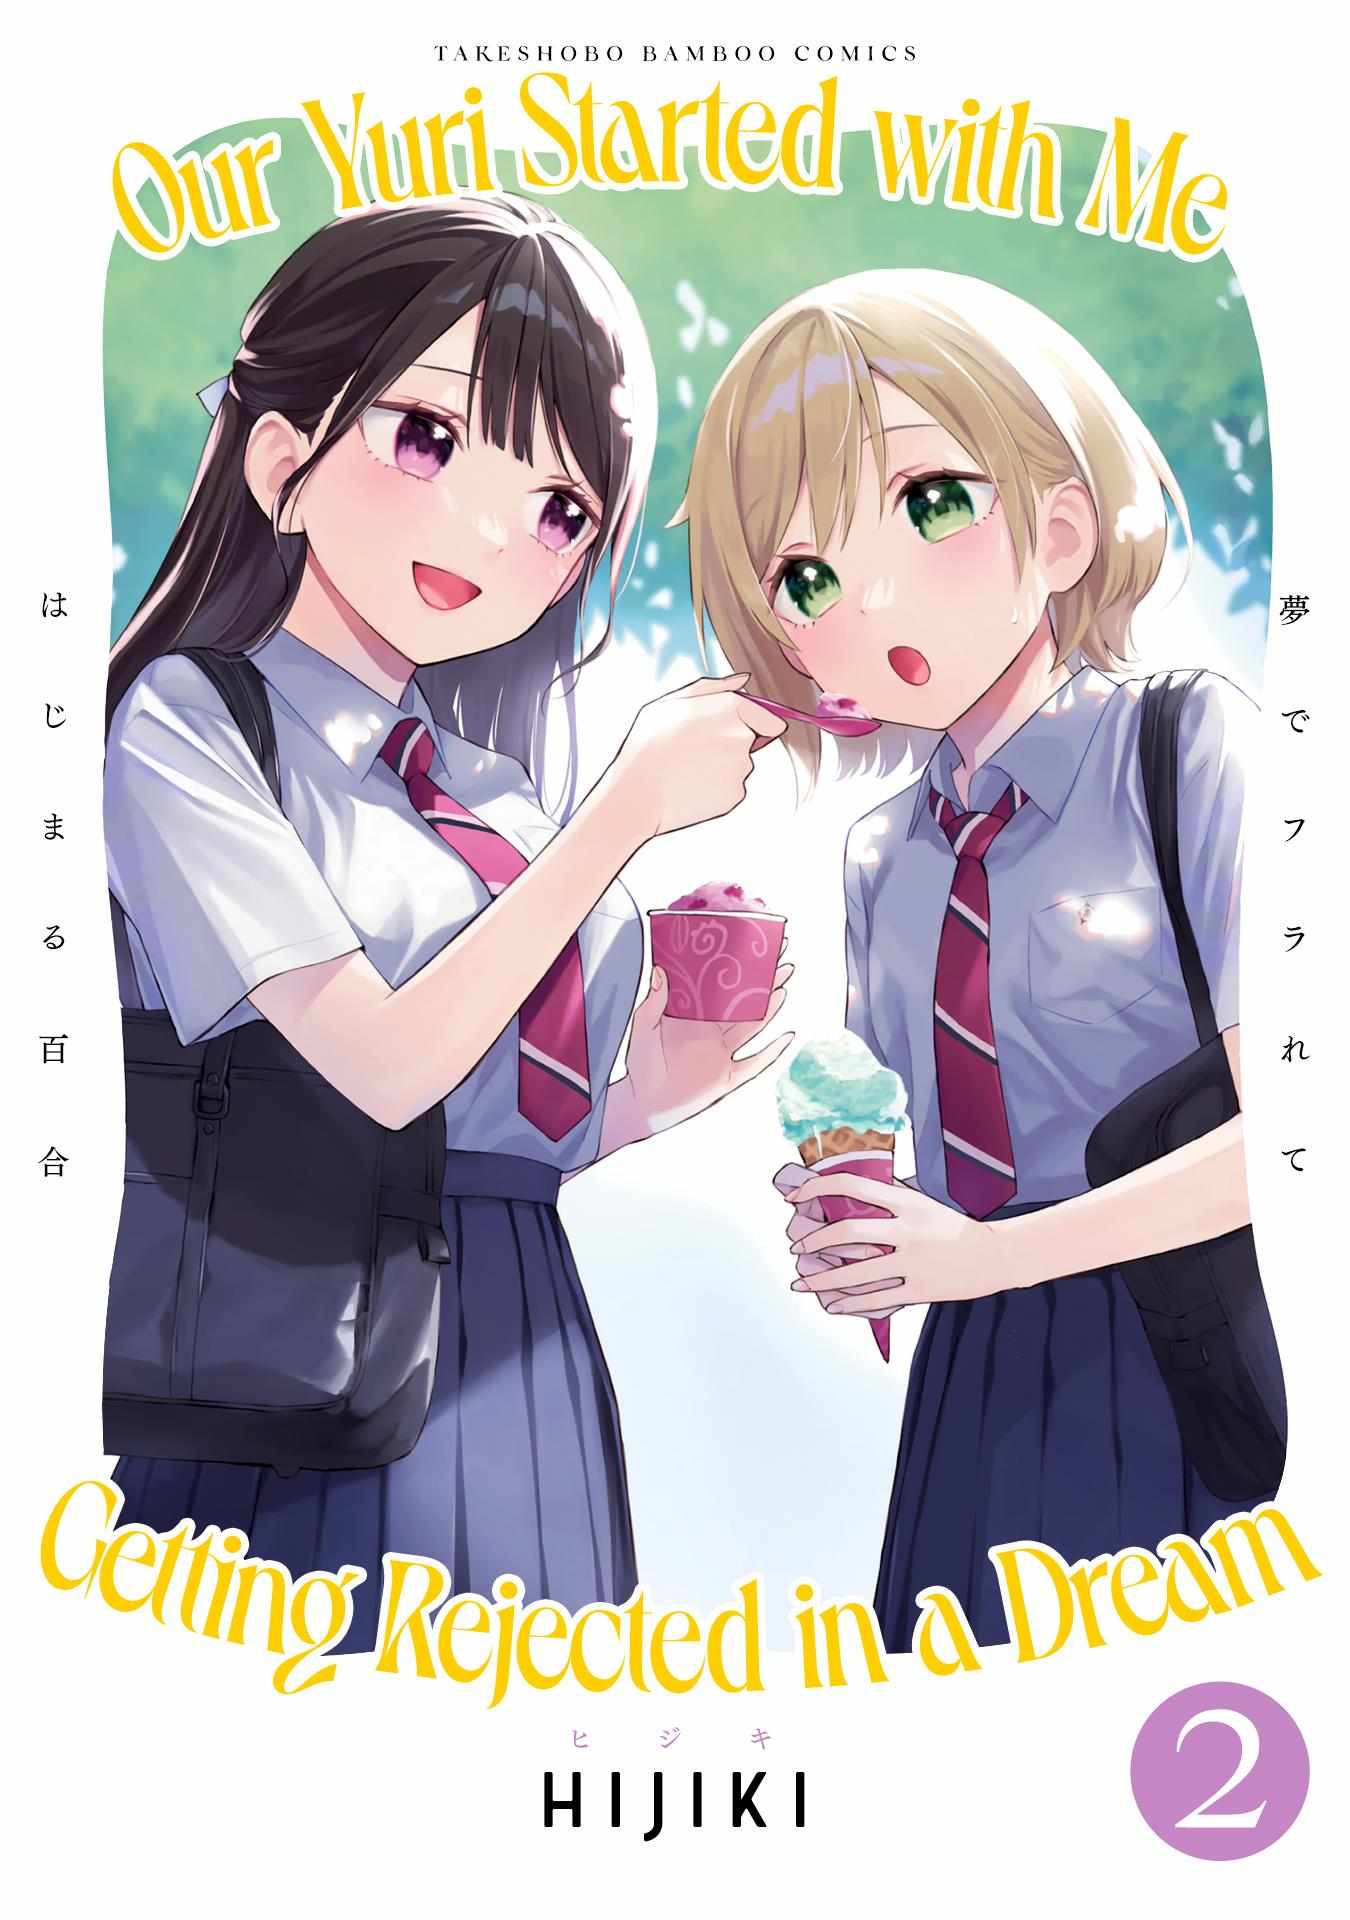 A Yuri Manga That Starts With Getting Rejected In A Dream - chapter 26.2 - #1